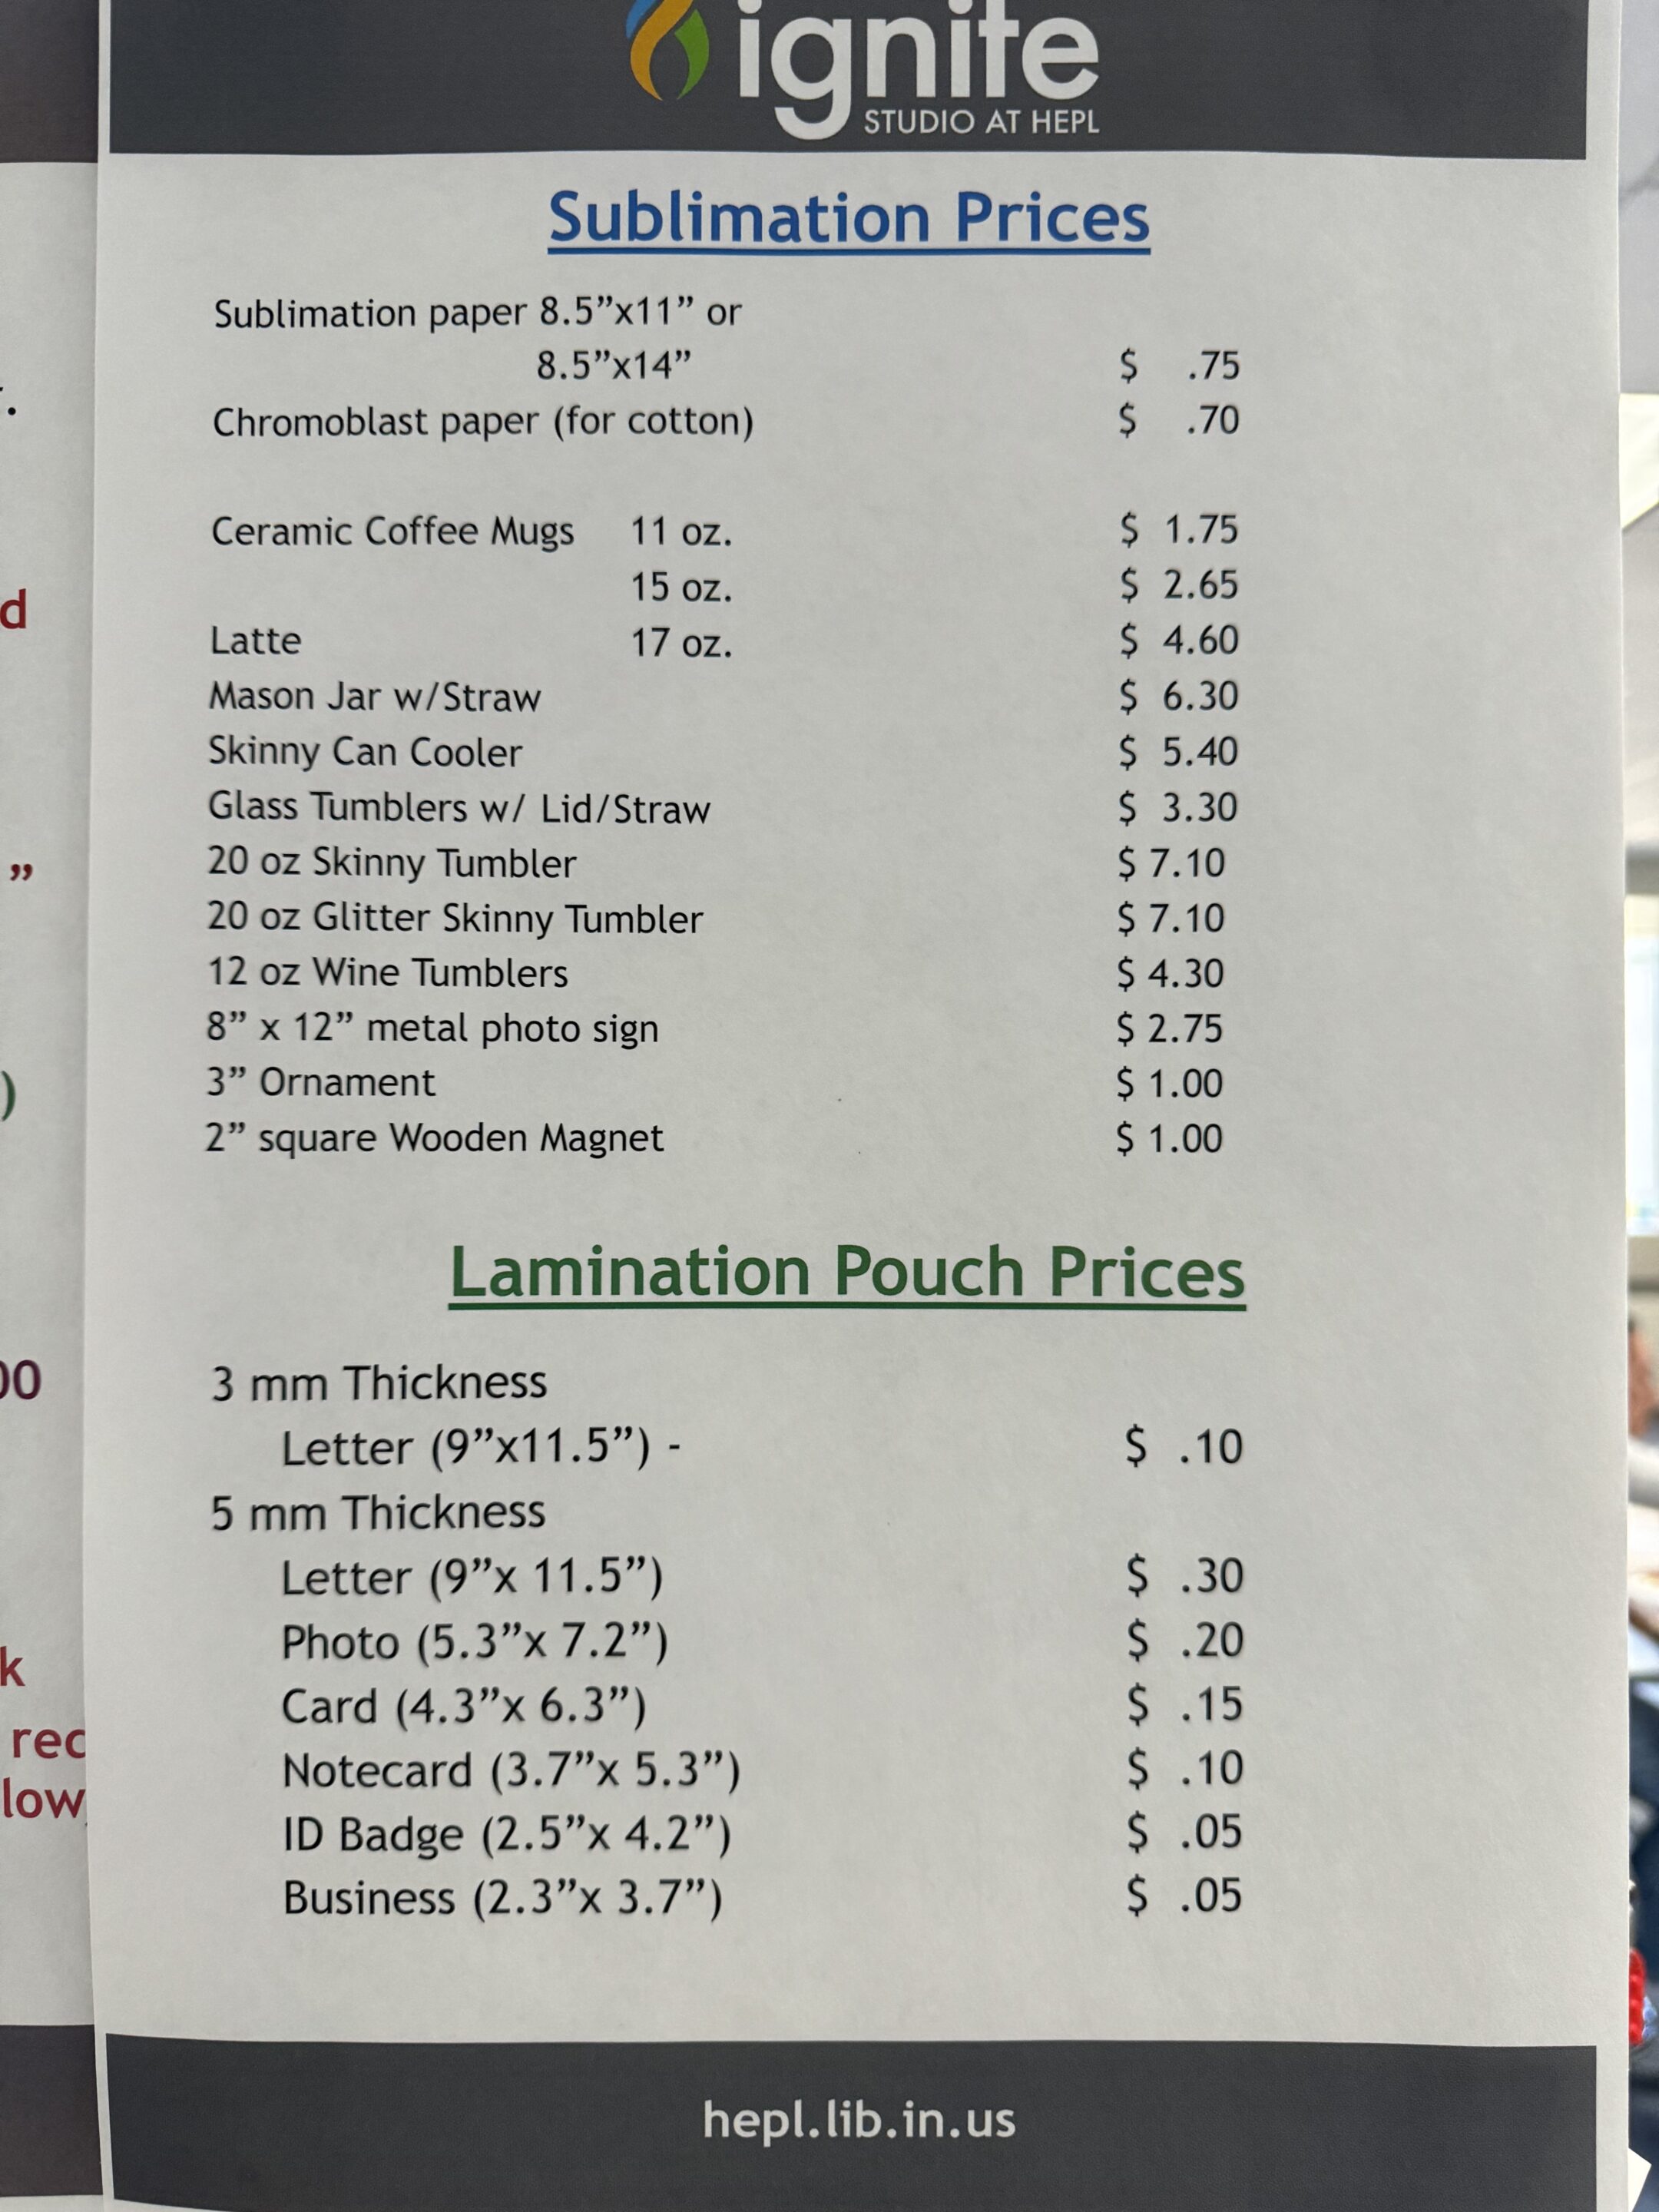 A listing of sublimation material prices in Ignite studio.